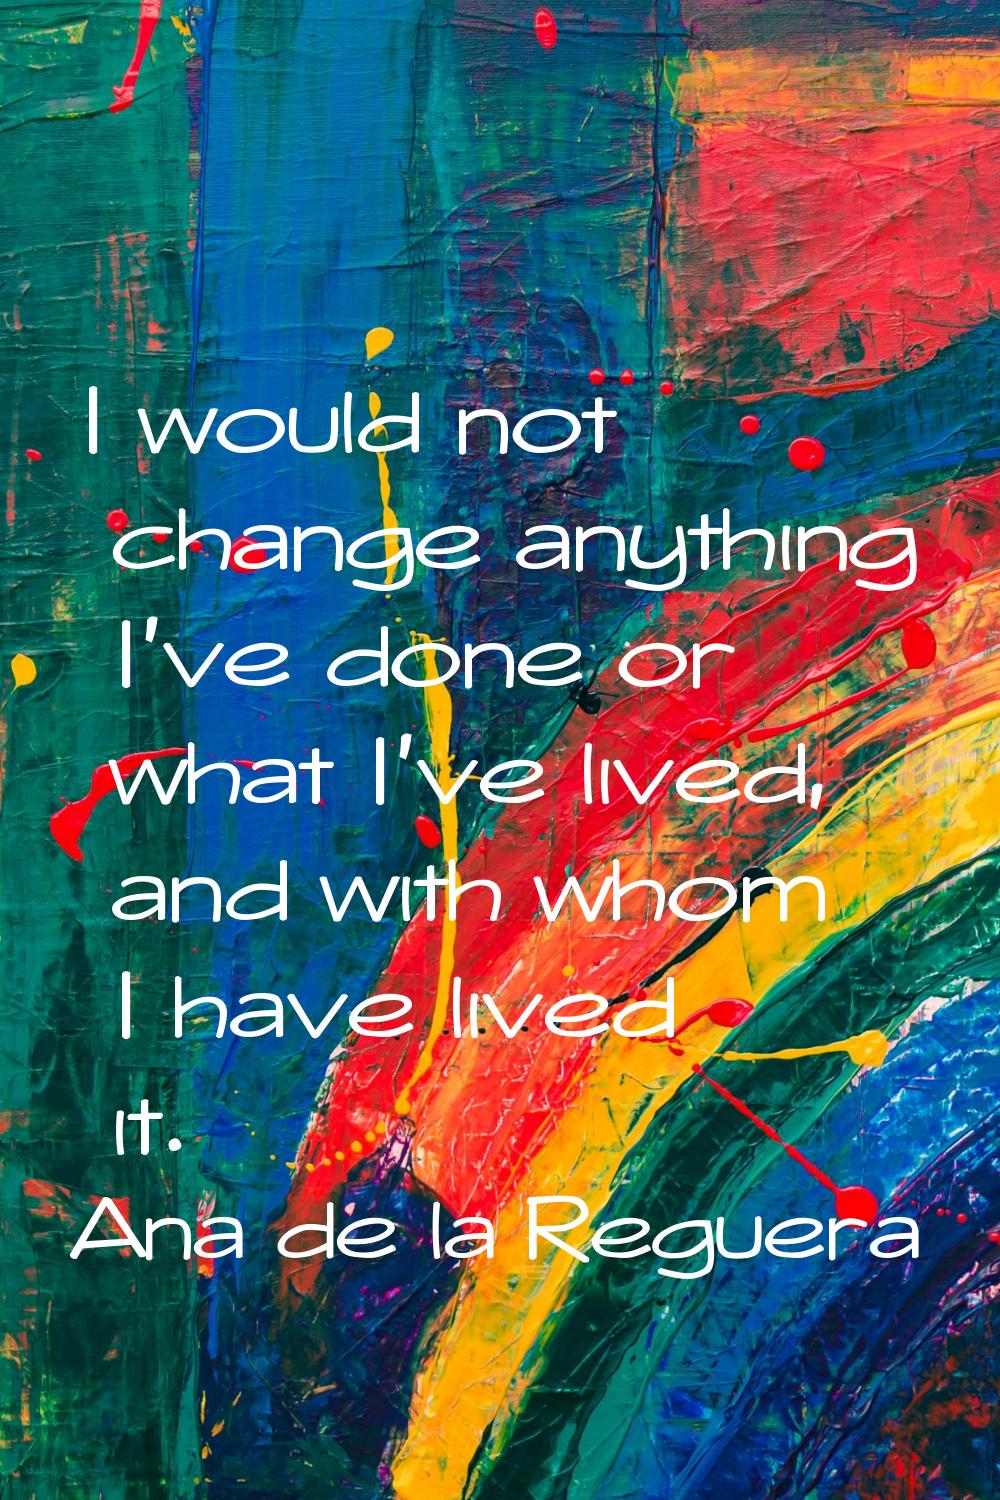 I would not change anything I've done or what I've lived, and with whom I have lived it.